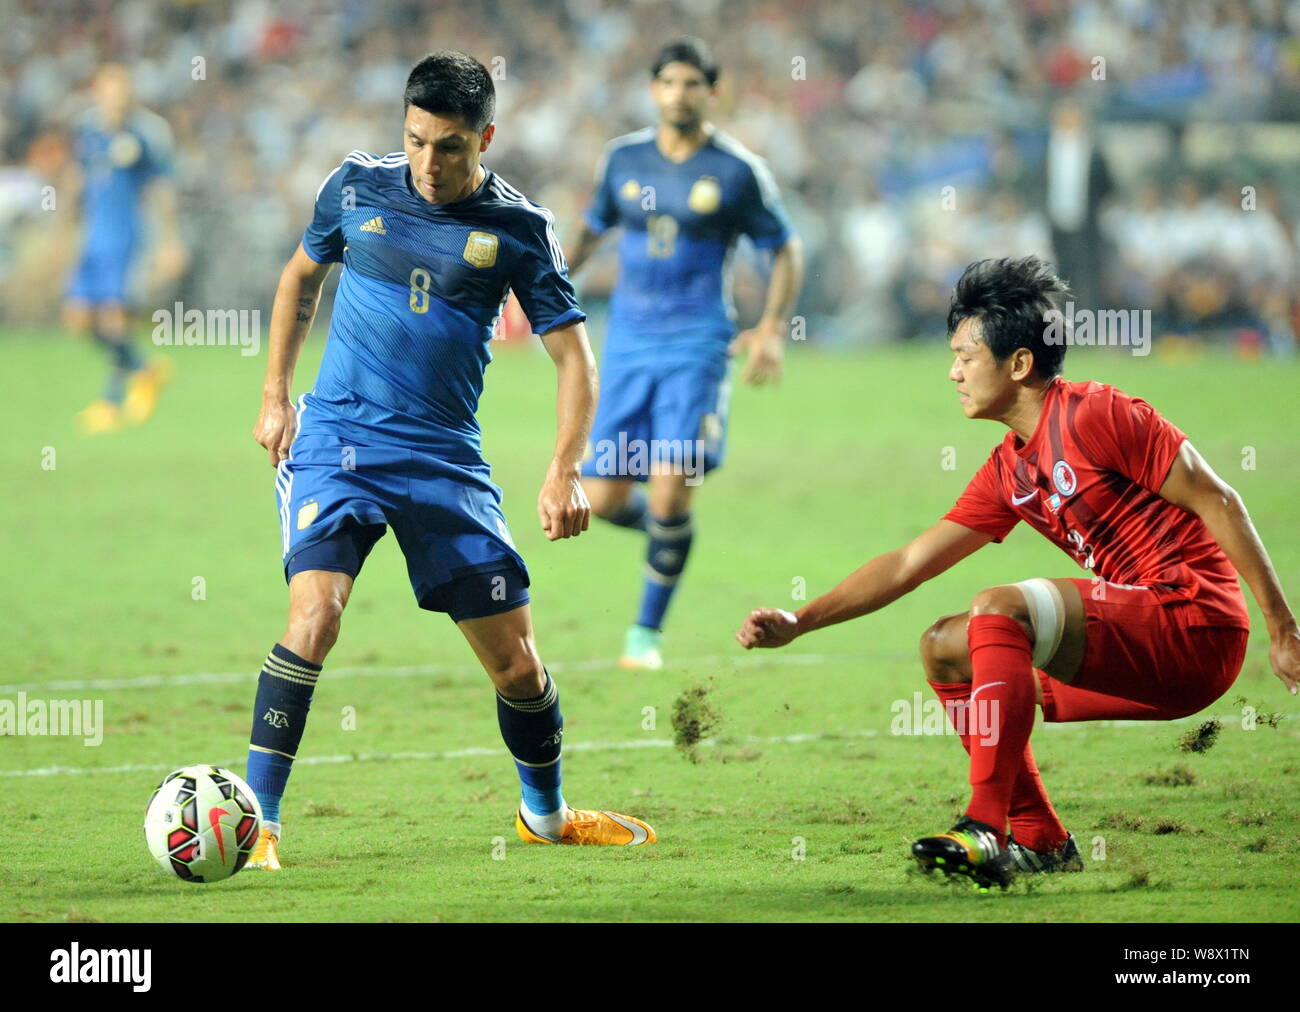 Enzo Perez of Argentina, left, challenges Cheung Kin-fung of Hong Kong during a friendly football match in Hong Kong, China, 14 October 2014.   Lionel Stock Photo